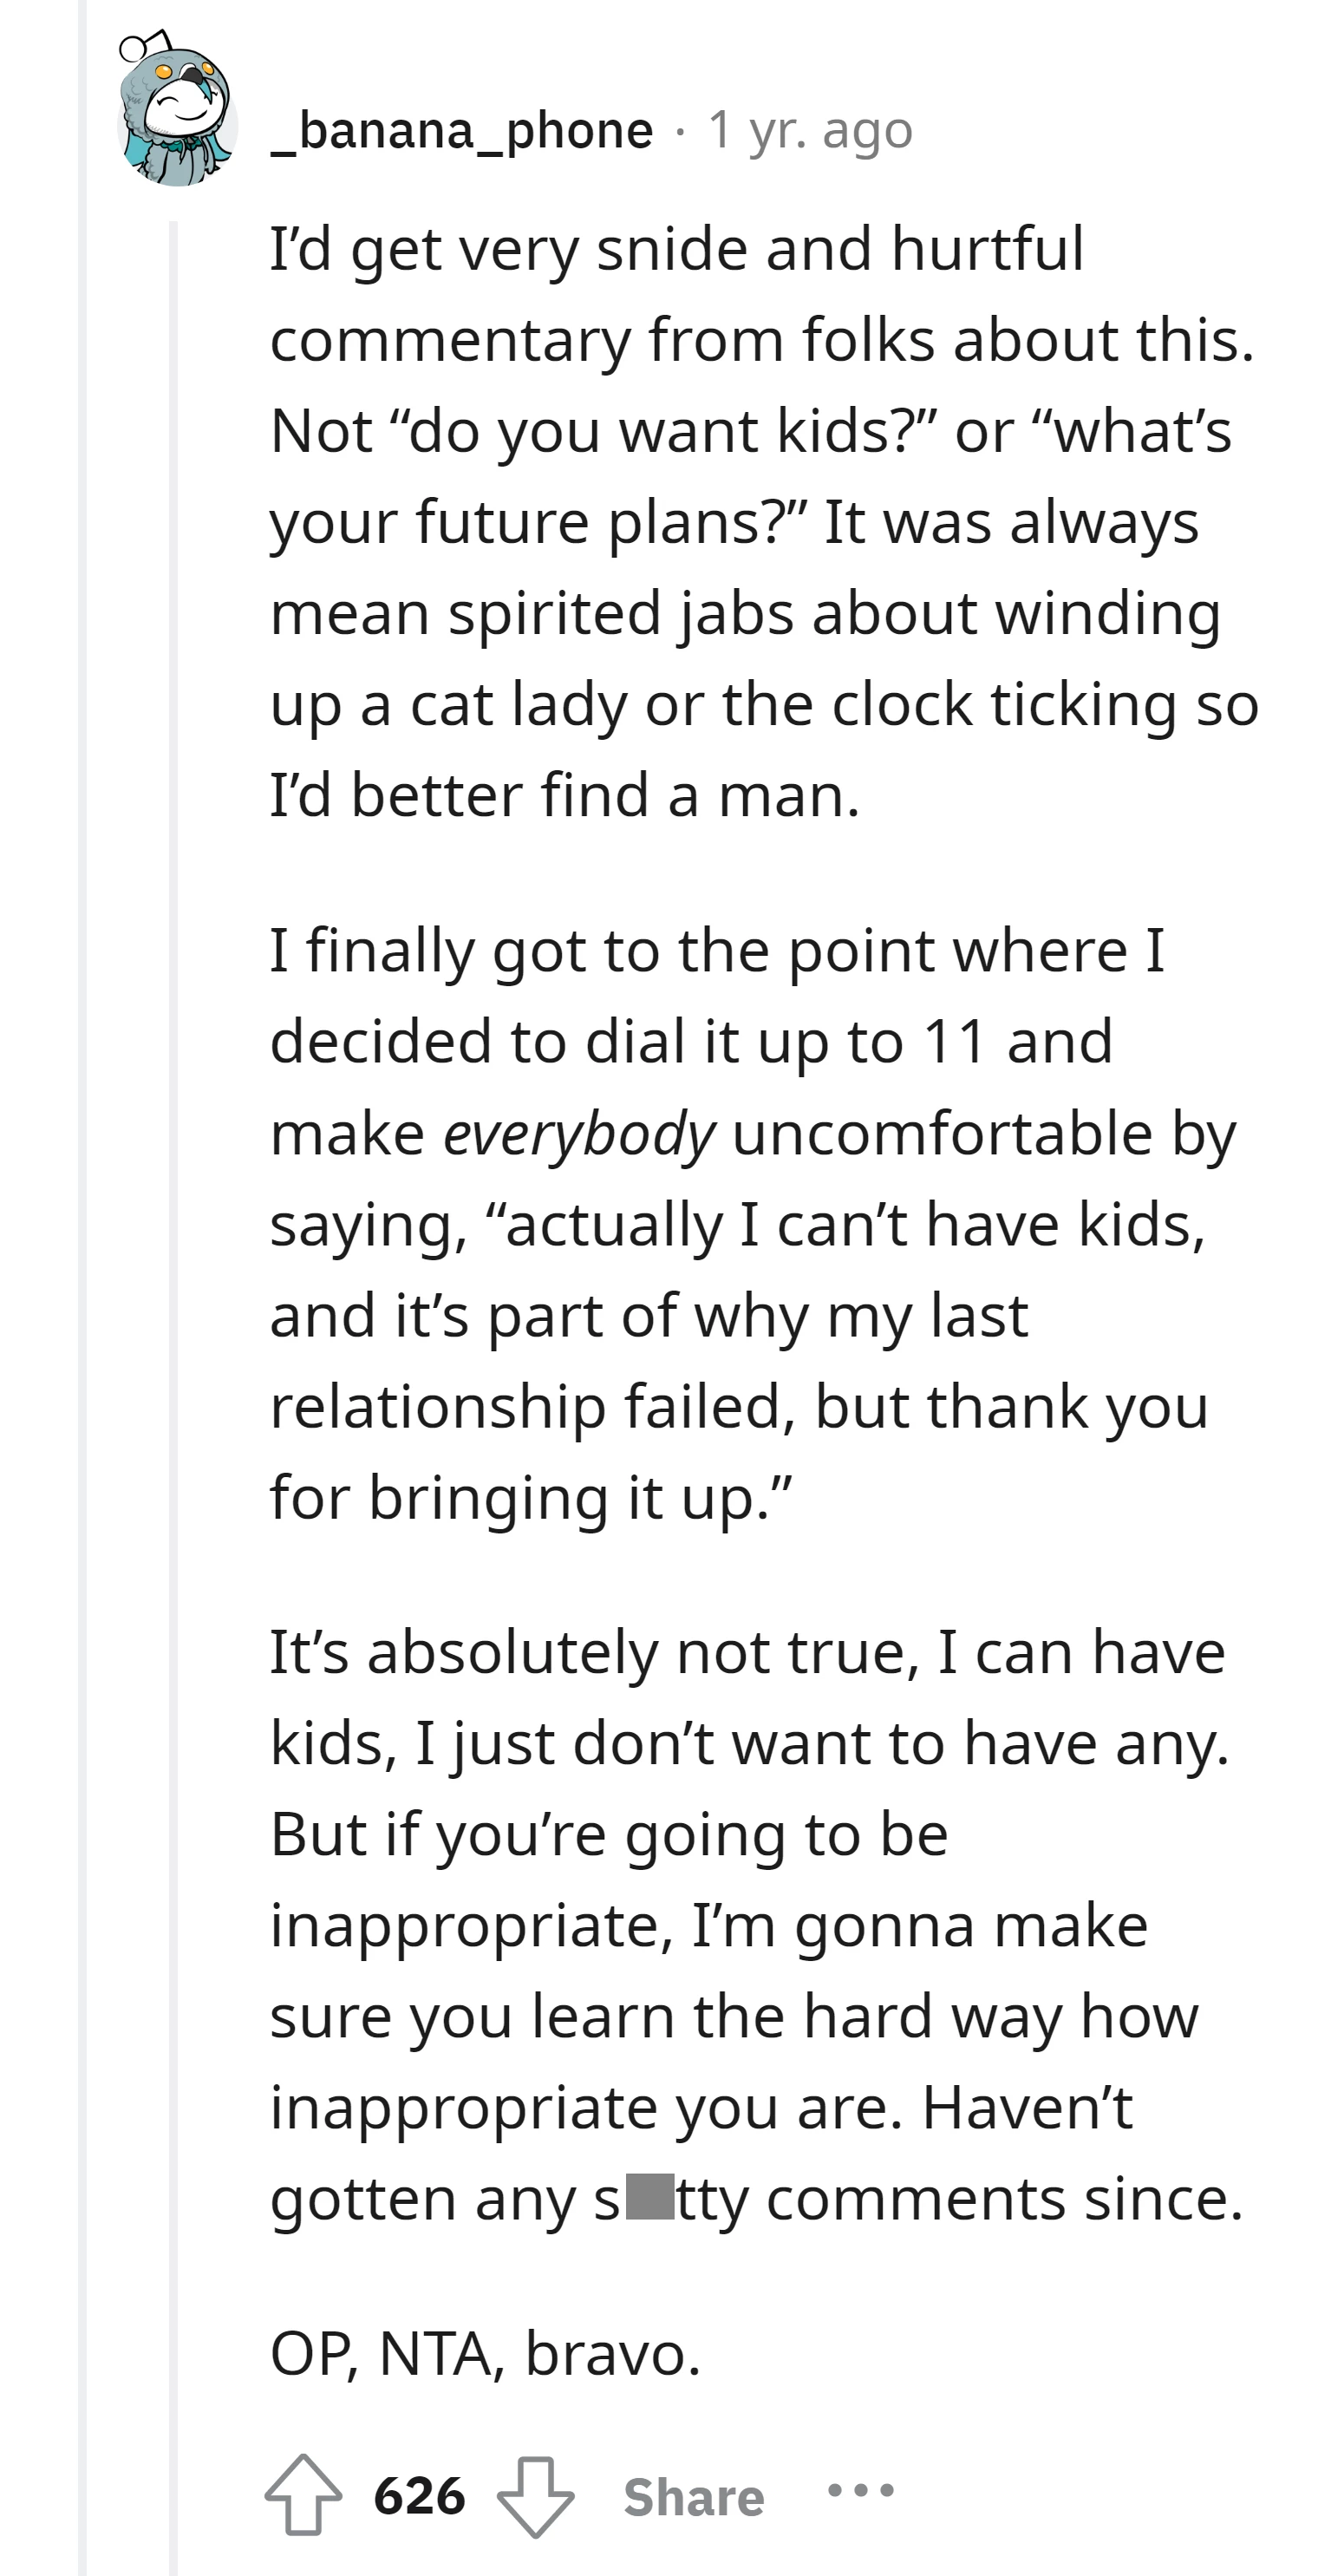 Redditor also shares their similar story